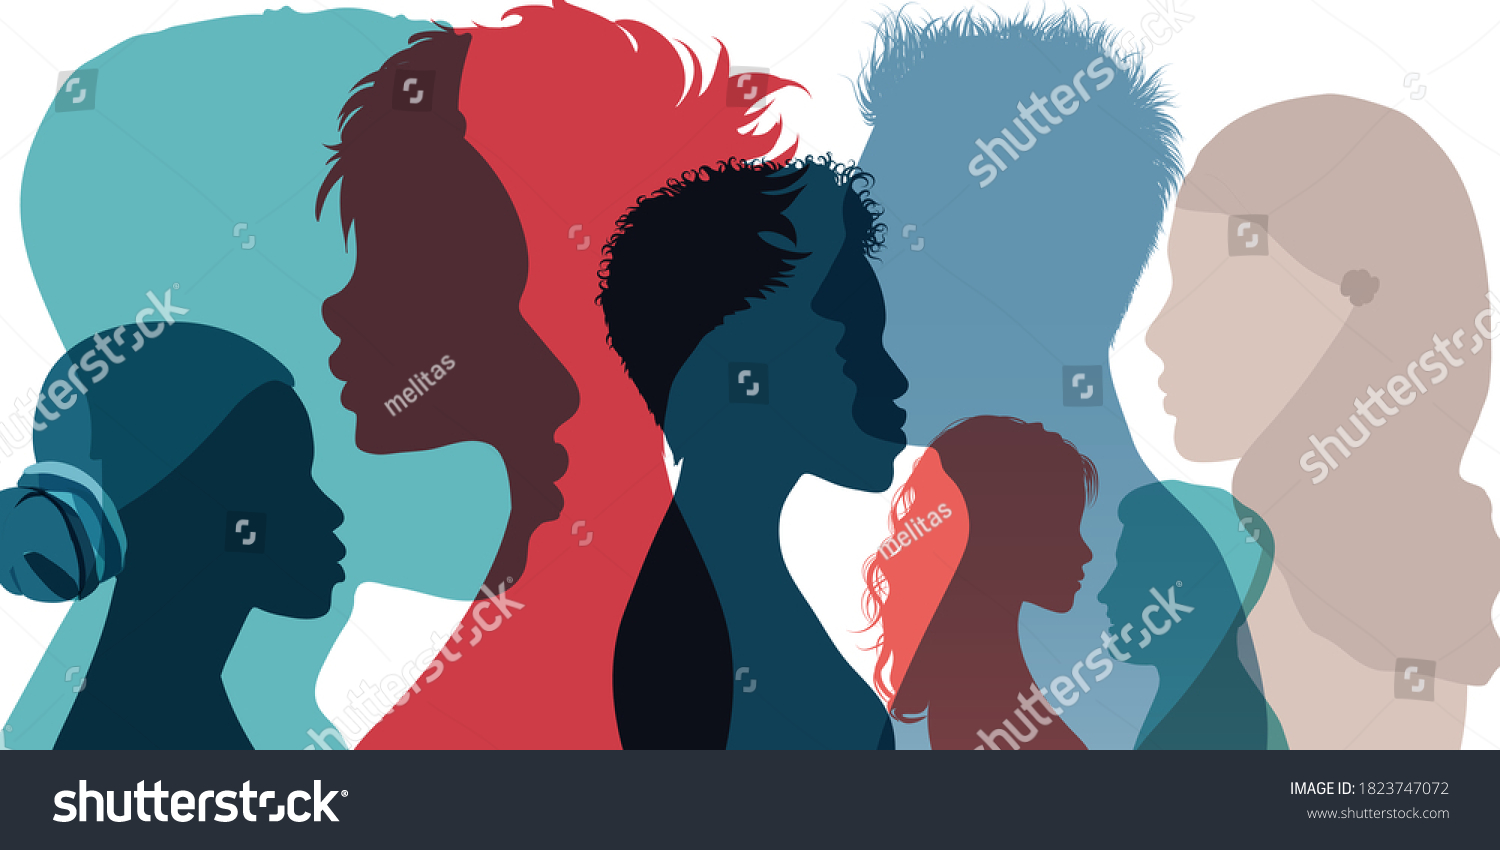 Racial equality and anti-racism. Silhouette profile group of men women and girl of diverse culture. Diversity multi-ethnic and multiracial people. Multicultural society. Friendship #1823747072